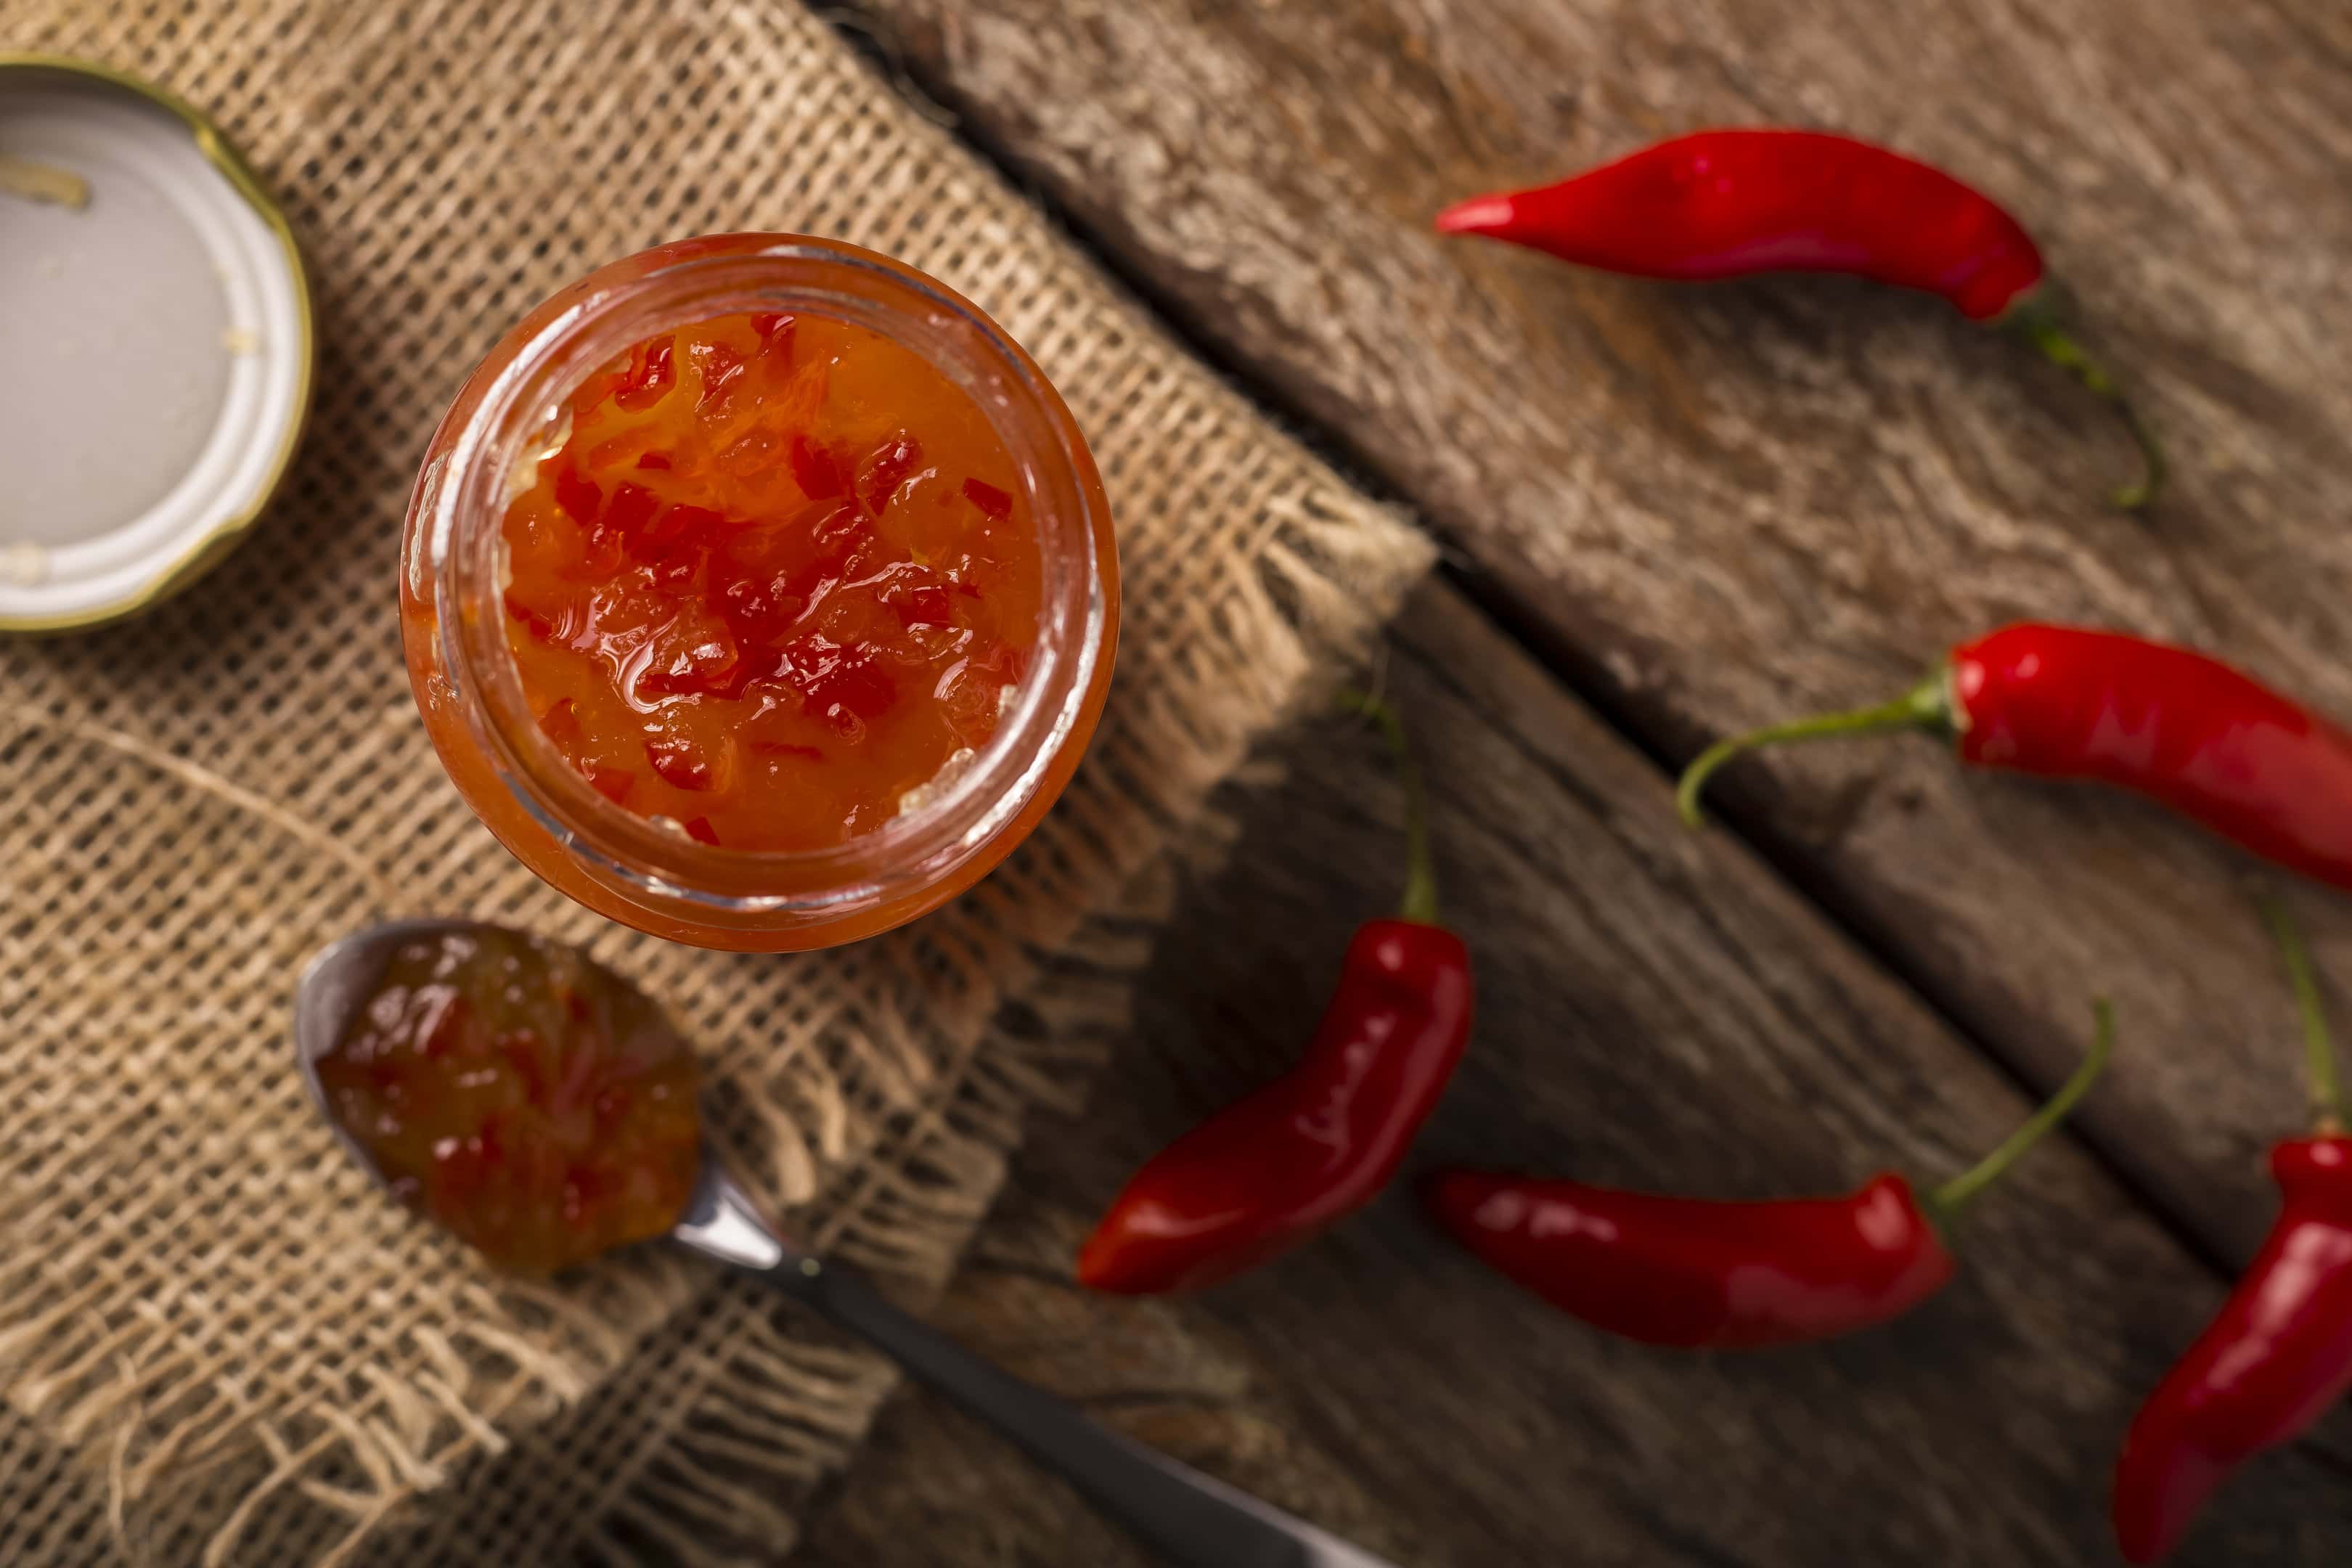 Sweet and spicy jalapeno jelly recipe from Pioneer Woman